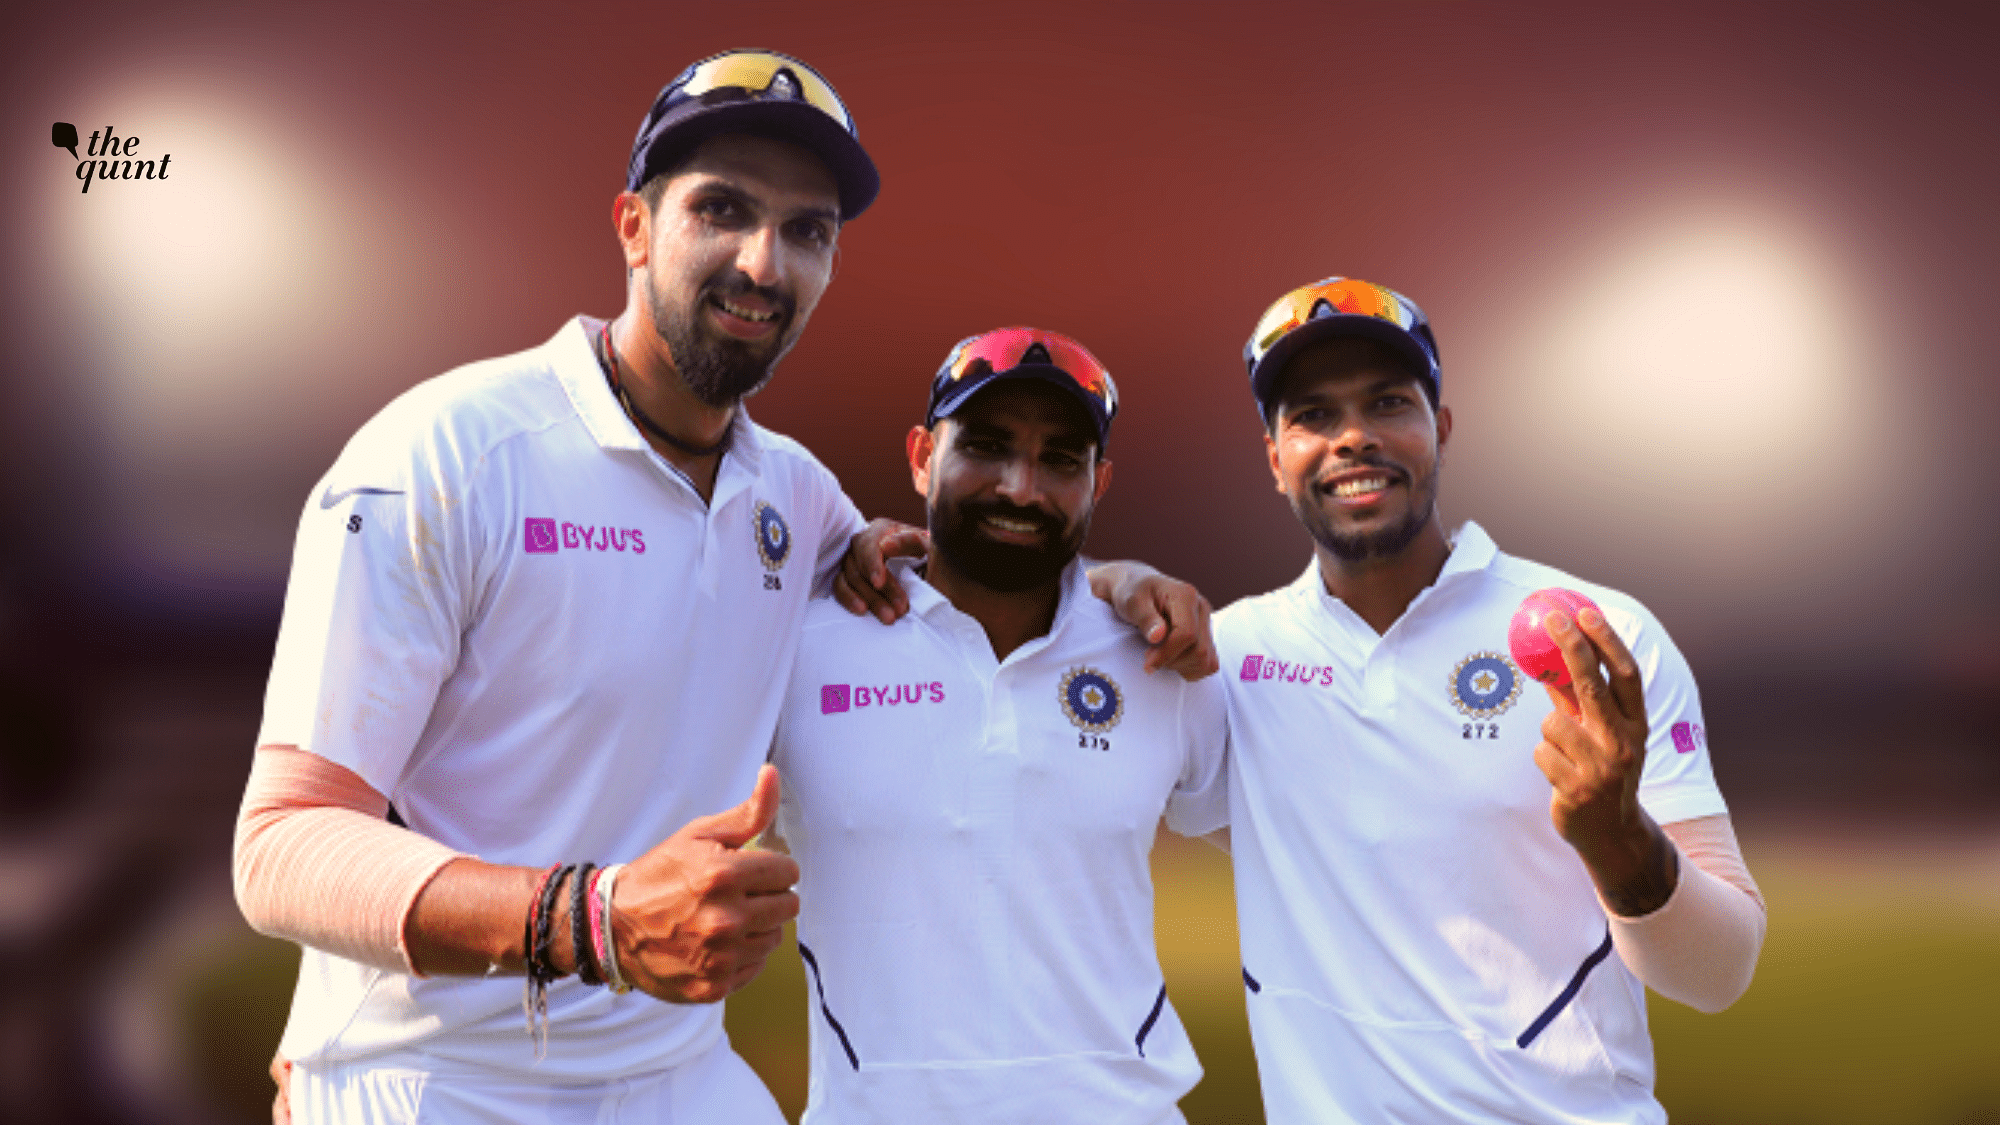 Ishant Sharma (left), Mohammed Shami (centre) and Umesh Yadav have taken 35 wickets among themselves in the two-match Bangladesh Test series.